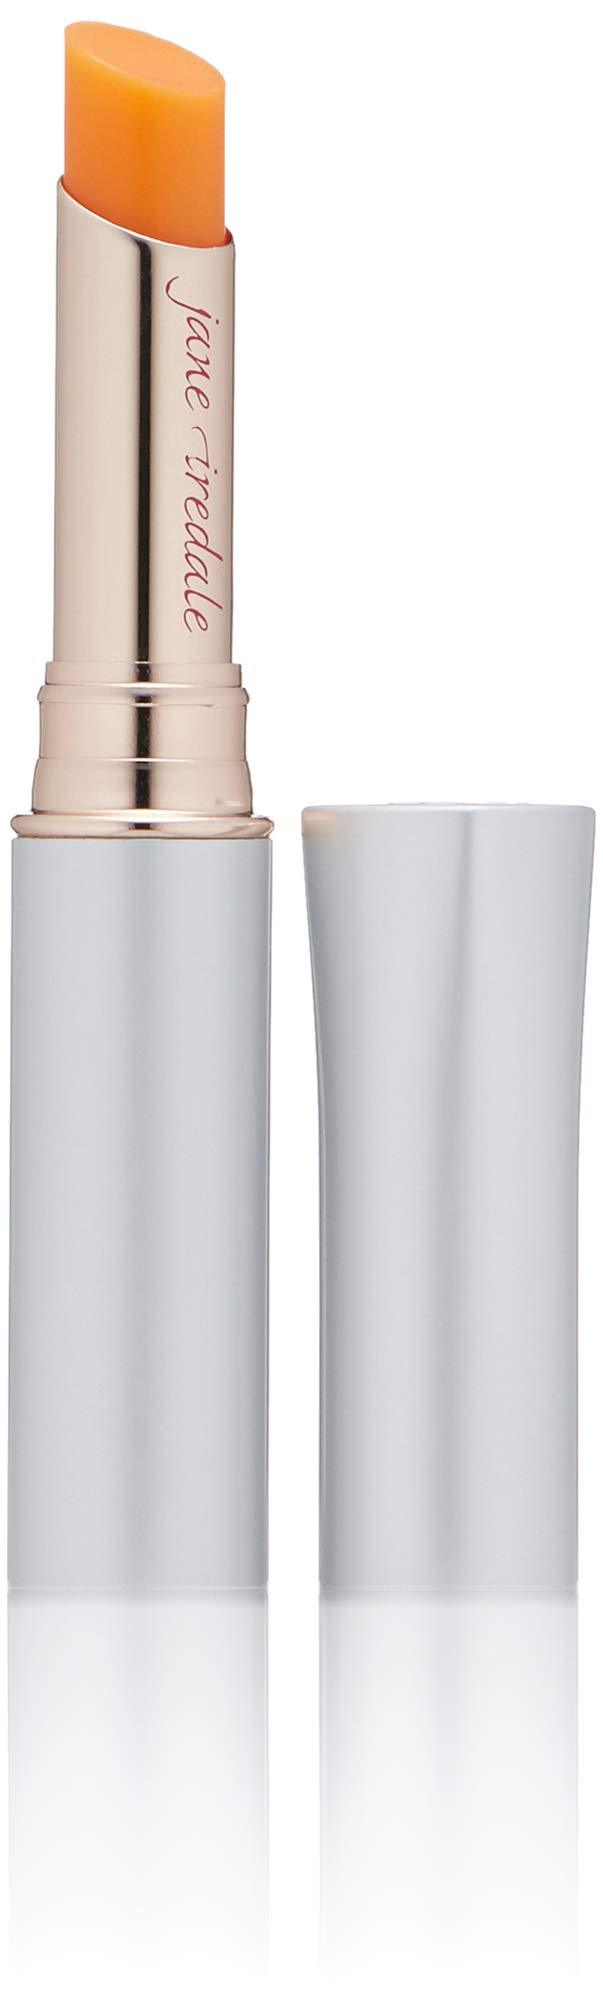 [Australia] - jane iredale Just Kissed Lip and Cheek Stain | Non-Drying, Long Lasting Color | Multipurpose Stain Suitable for All Skin Tones | Cruelty-Free Makeup Forever Peach 